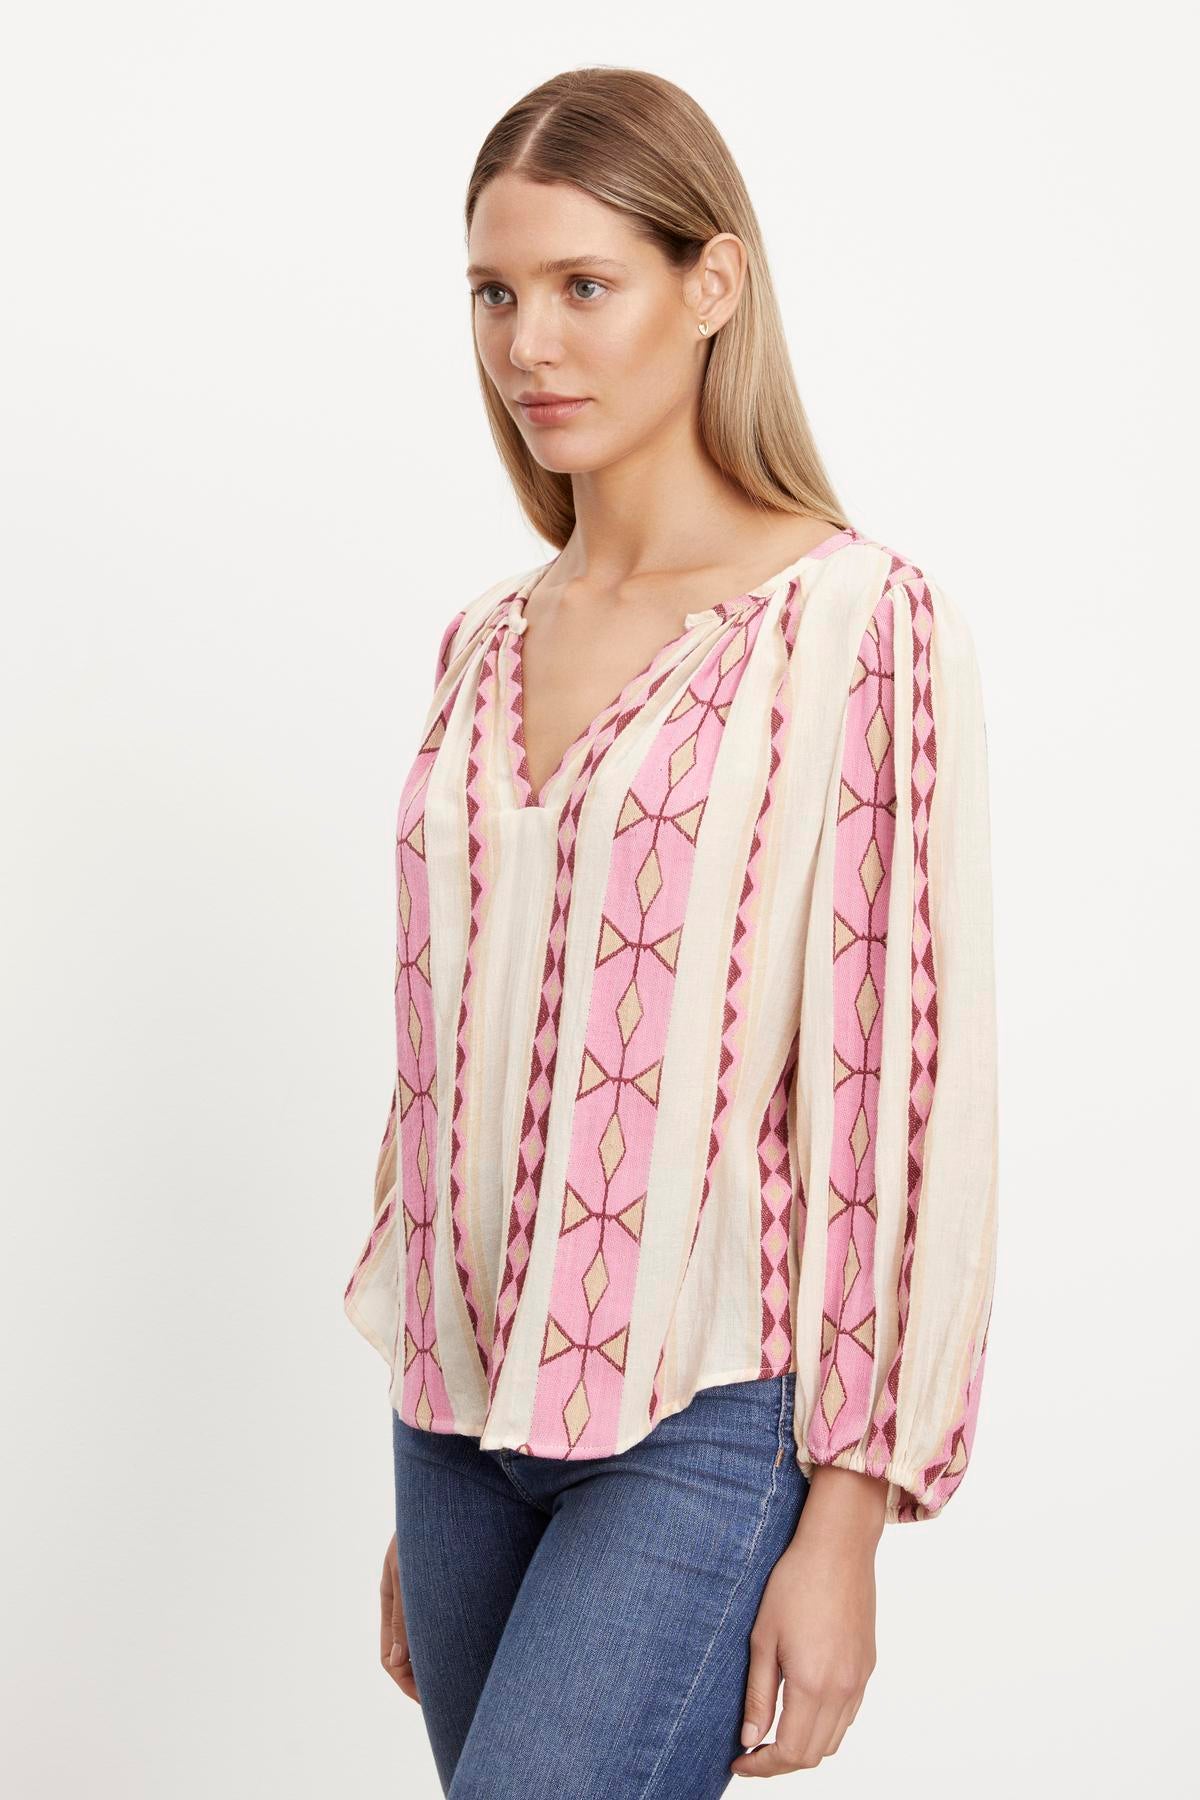   The model is wearing a pink and white embroidered NANNI JACQUARD V-NECK BLOUSE with elastic cuffs and a v-neckline by Velvet by Graham & Spencer. 